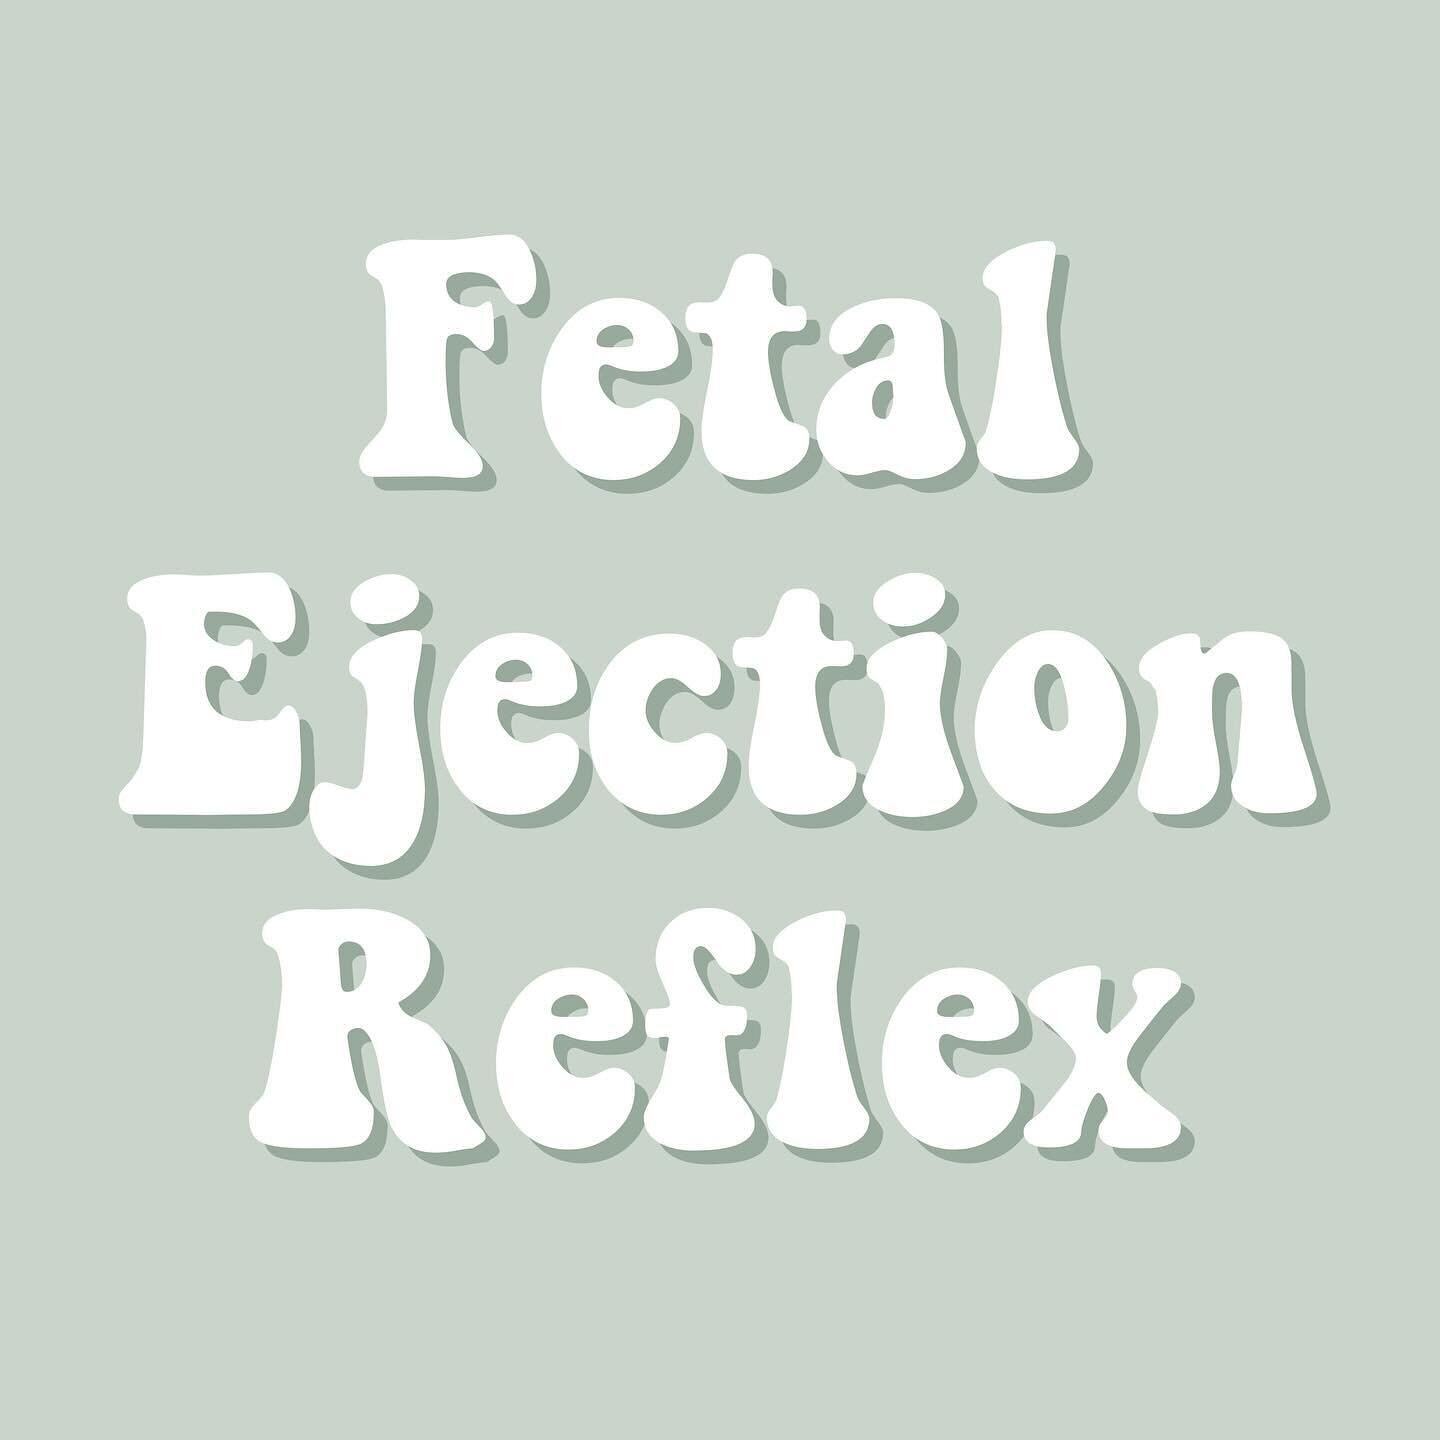 The fetal ejection reflex (FER) is when your body begins expelling your baby without you actively pushing. This occurs during transition and is triggered by hormones and the stimulation of nerve endings as your baby pushes down on the cervix. 

FER c